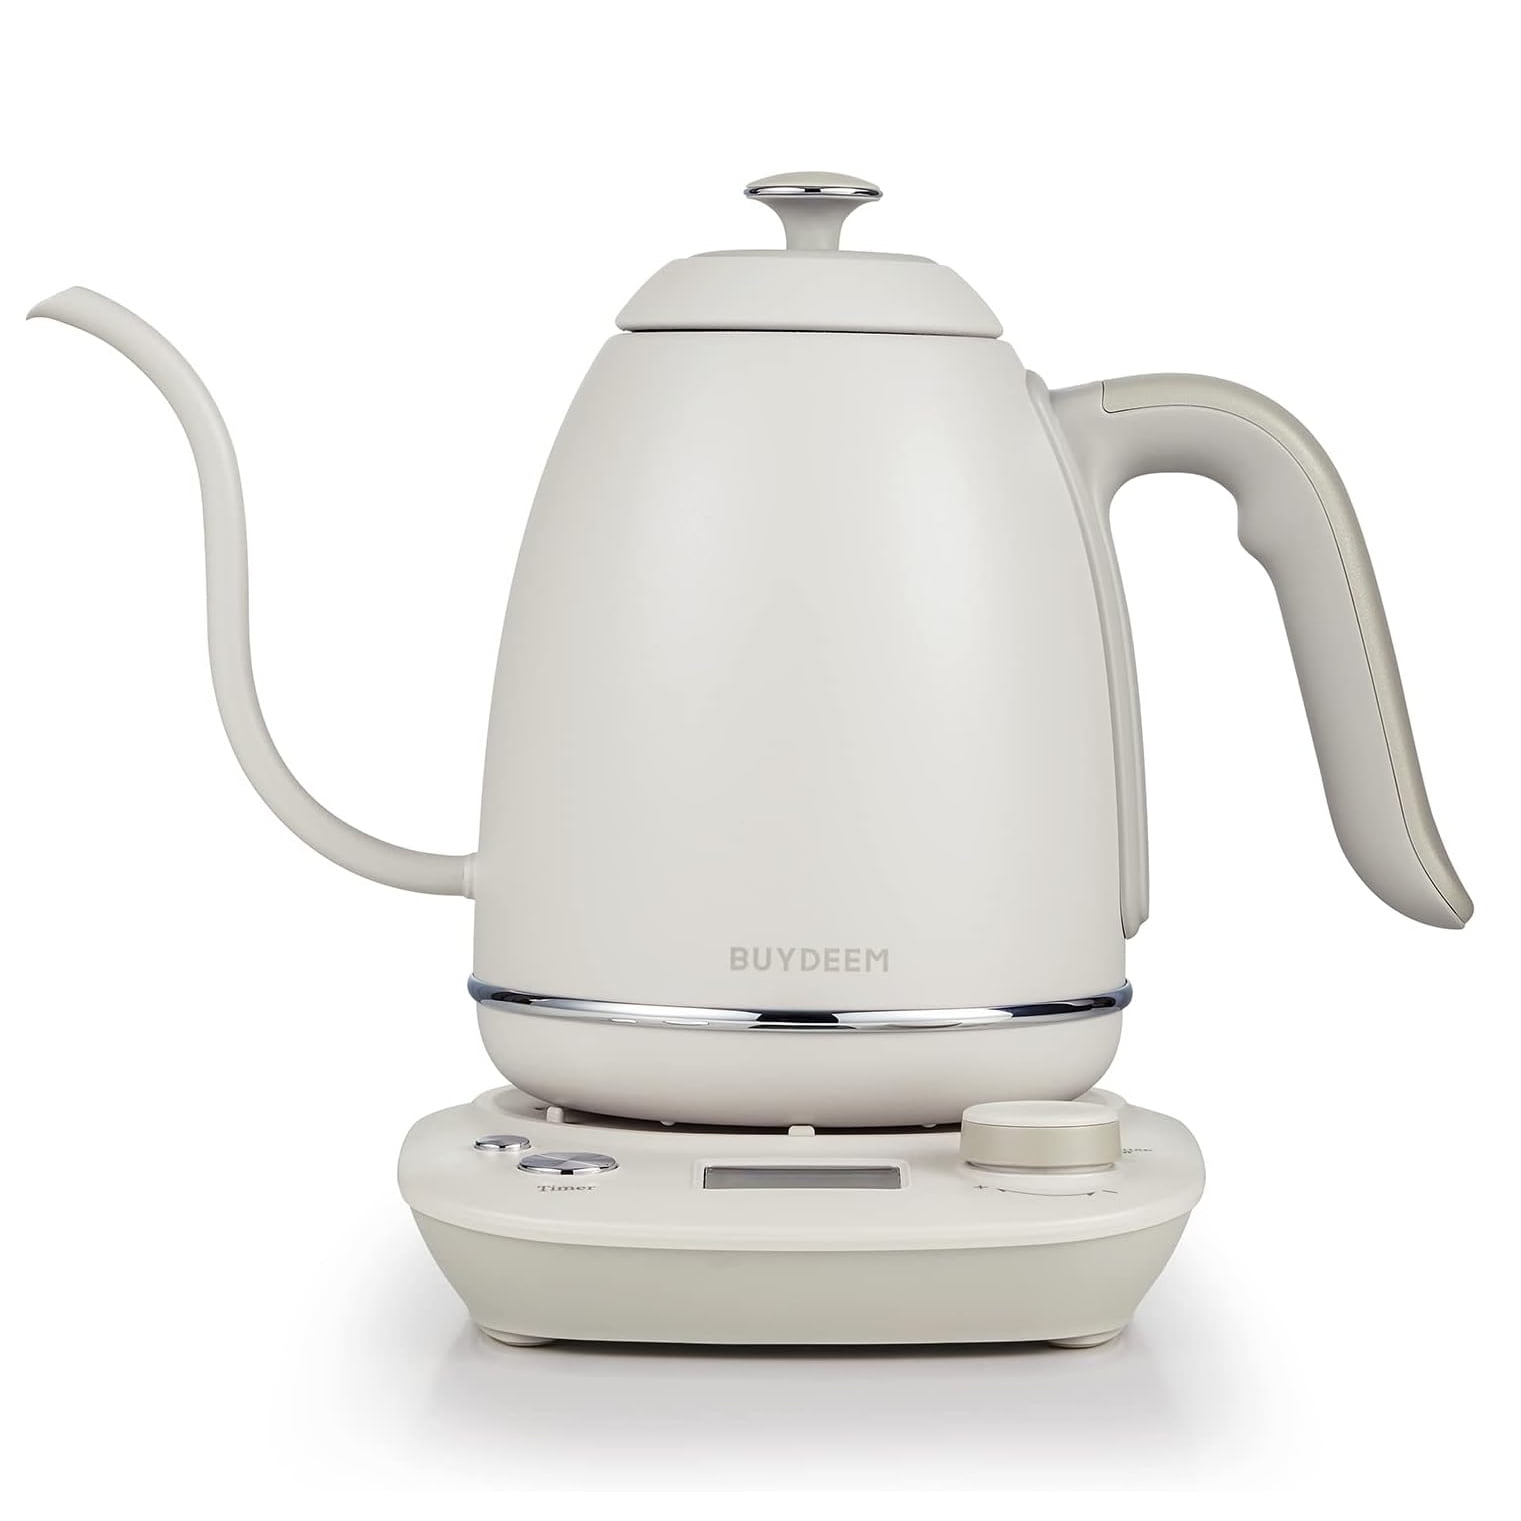 Homtone Gooseneck Electric Kettle, Coffee Pour Over Kettle, Temp Control Tea Kettle, Stainless Steel Kettle with 6 Variable Presets, Auto Shutoff, 08L